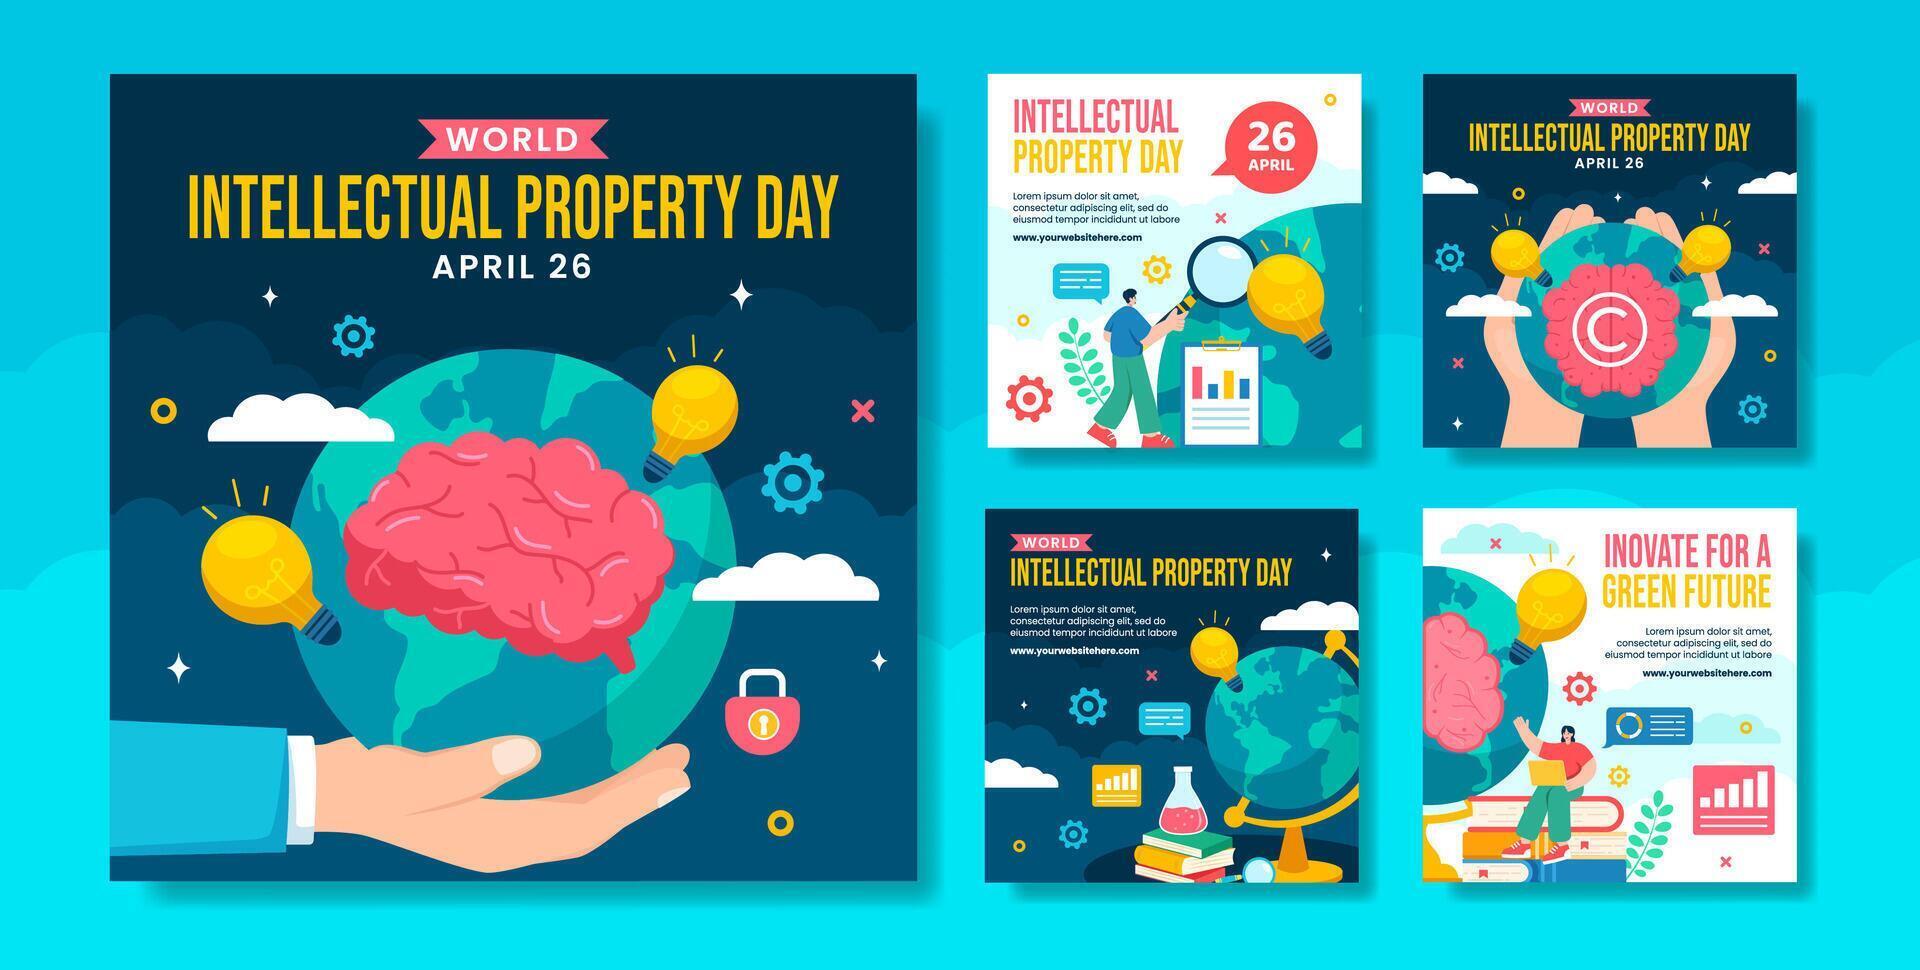 Intellectual Property Day Social Media Post Cartoon Hand Drawn Templates Background Illustration vector